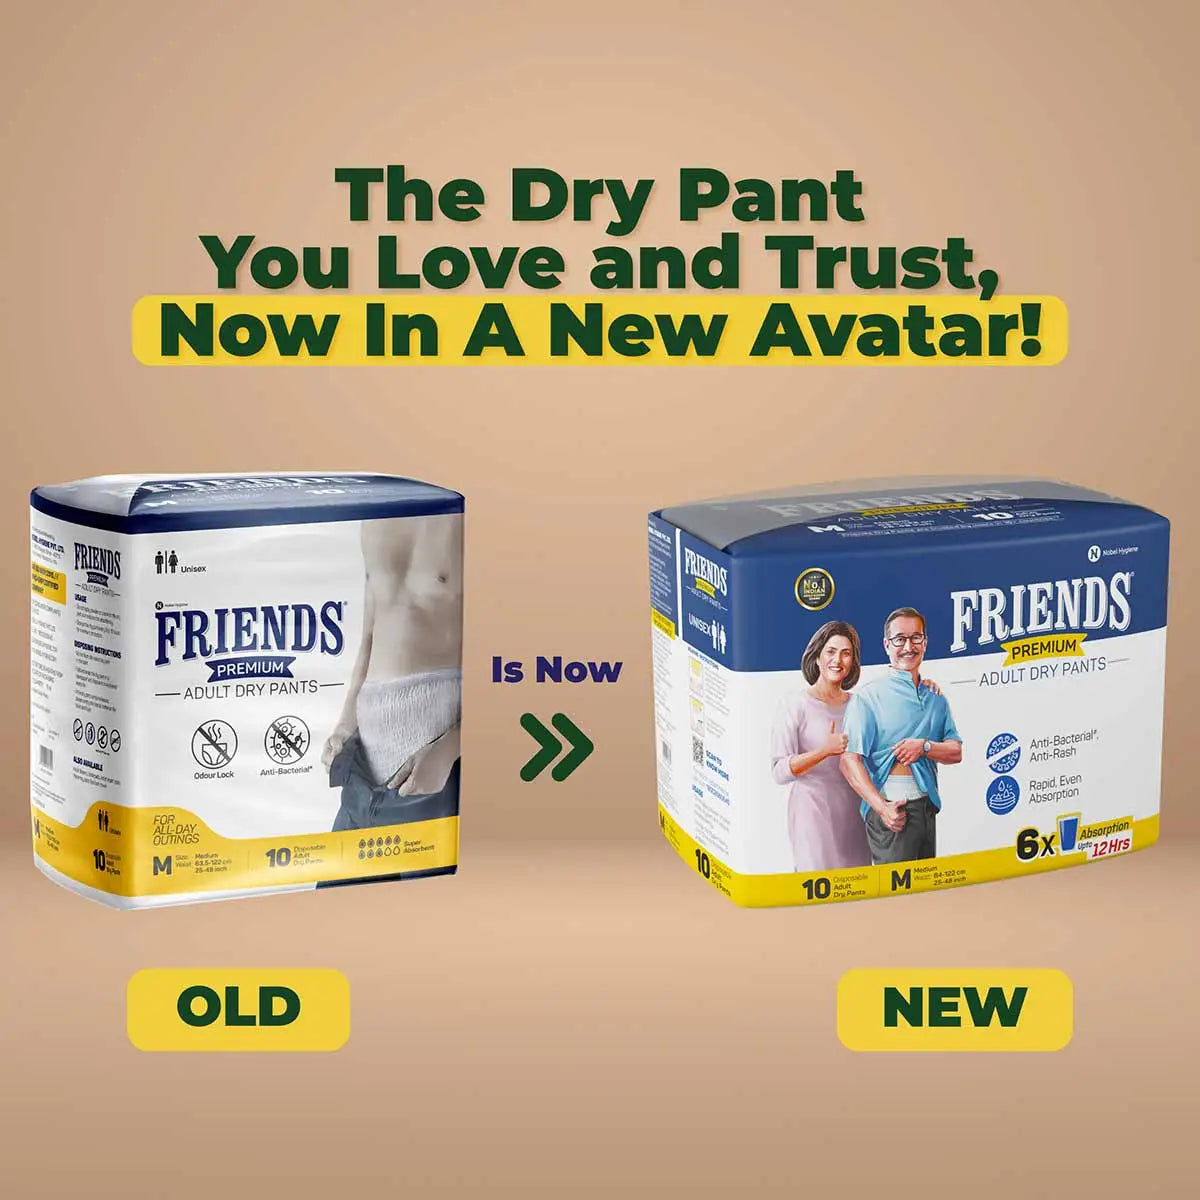 20 Pull Ups Friends Classic Adult Diaper, Size: Medium, 10 Dry Pants at Rs  263.68/pack in Lucknow